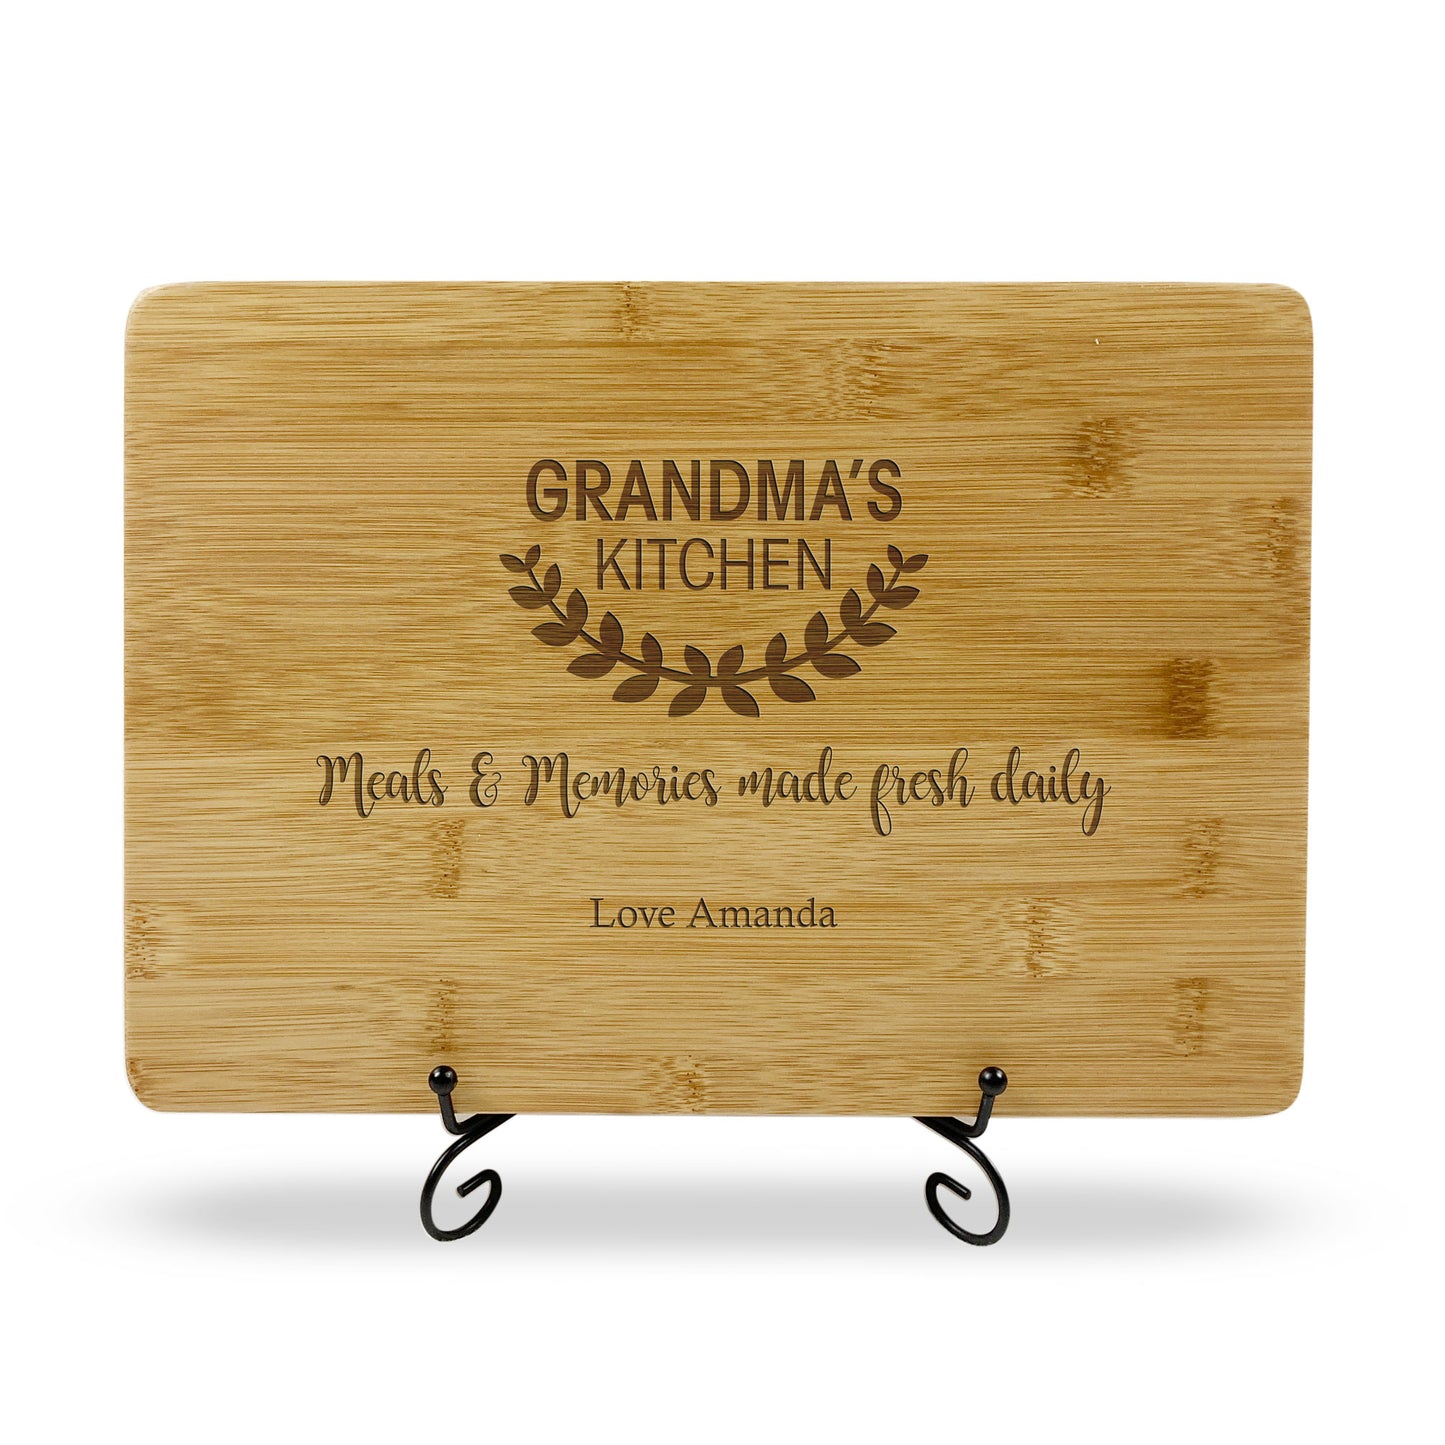 Wooden Grandma's Kitchen Chopping Board Mothers Day Gift for Mum Grandmother